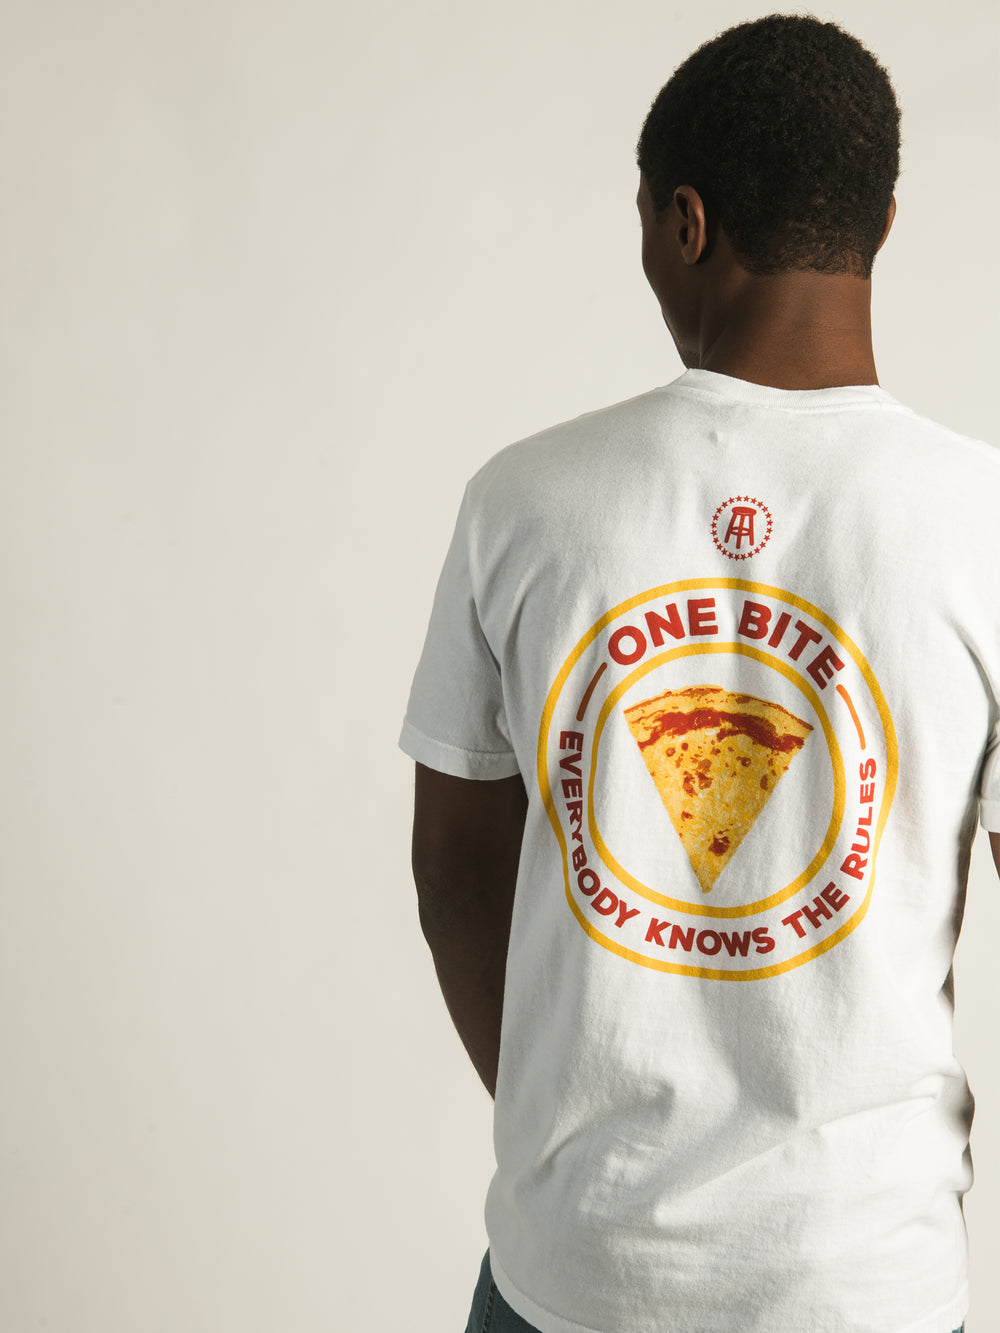 BARSTOOL SPORTS ONE BITE EVERYBODY KNOWS THE RULES T-SHIRT - CLEARANCE